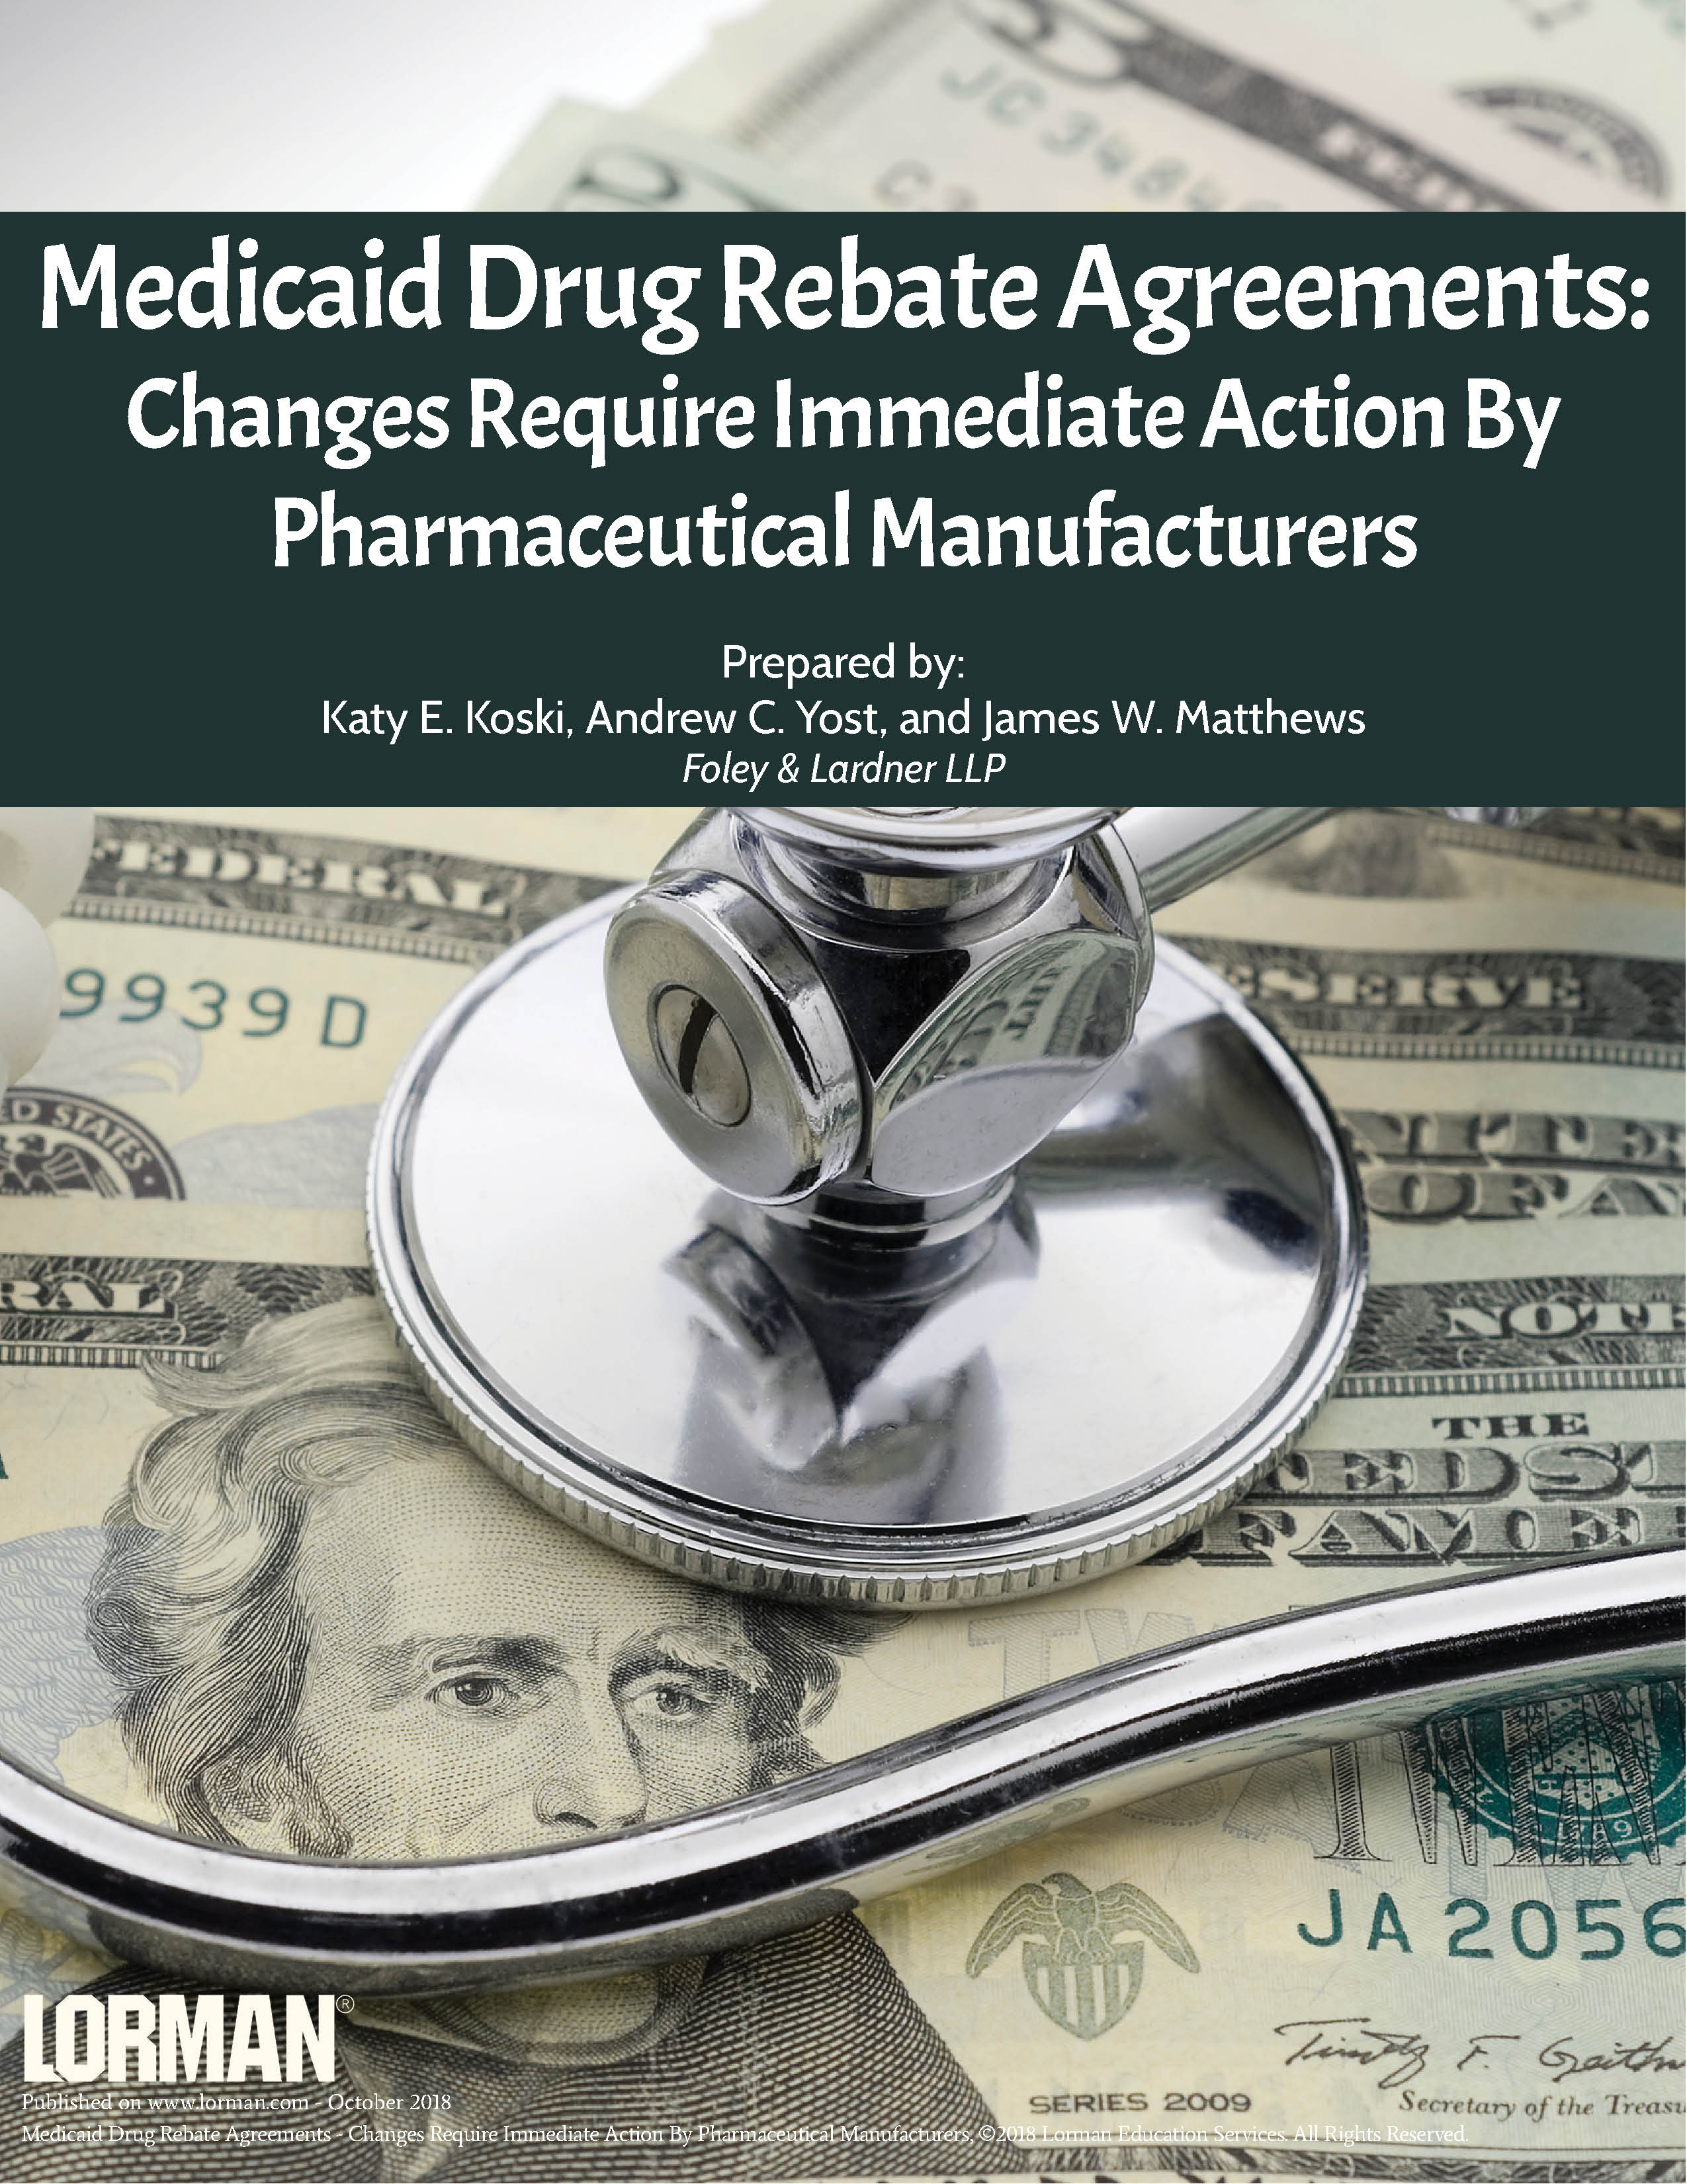 Medicaid Drug Rebate Agreements: Changes Require Immediate Action By Pharmaceutical Manufacturers